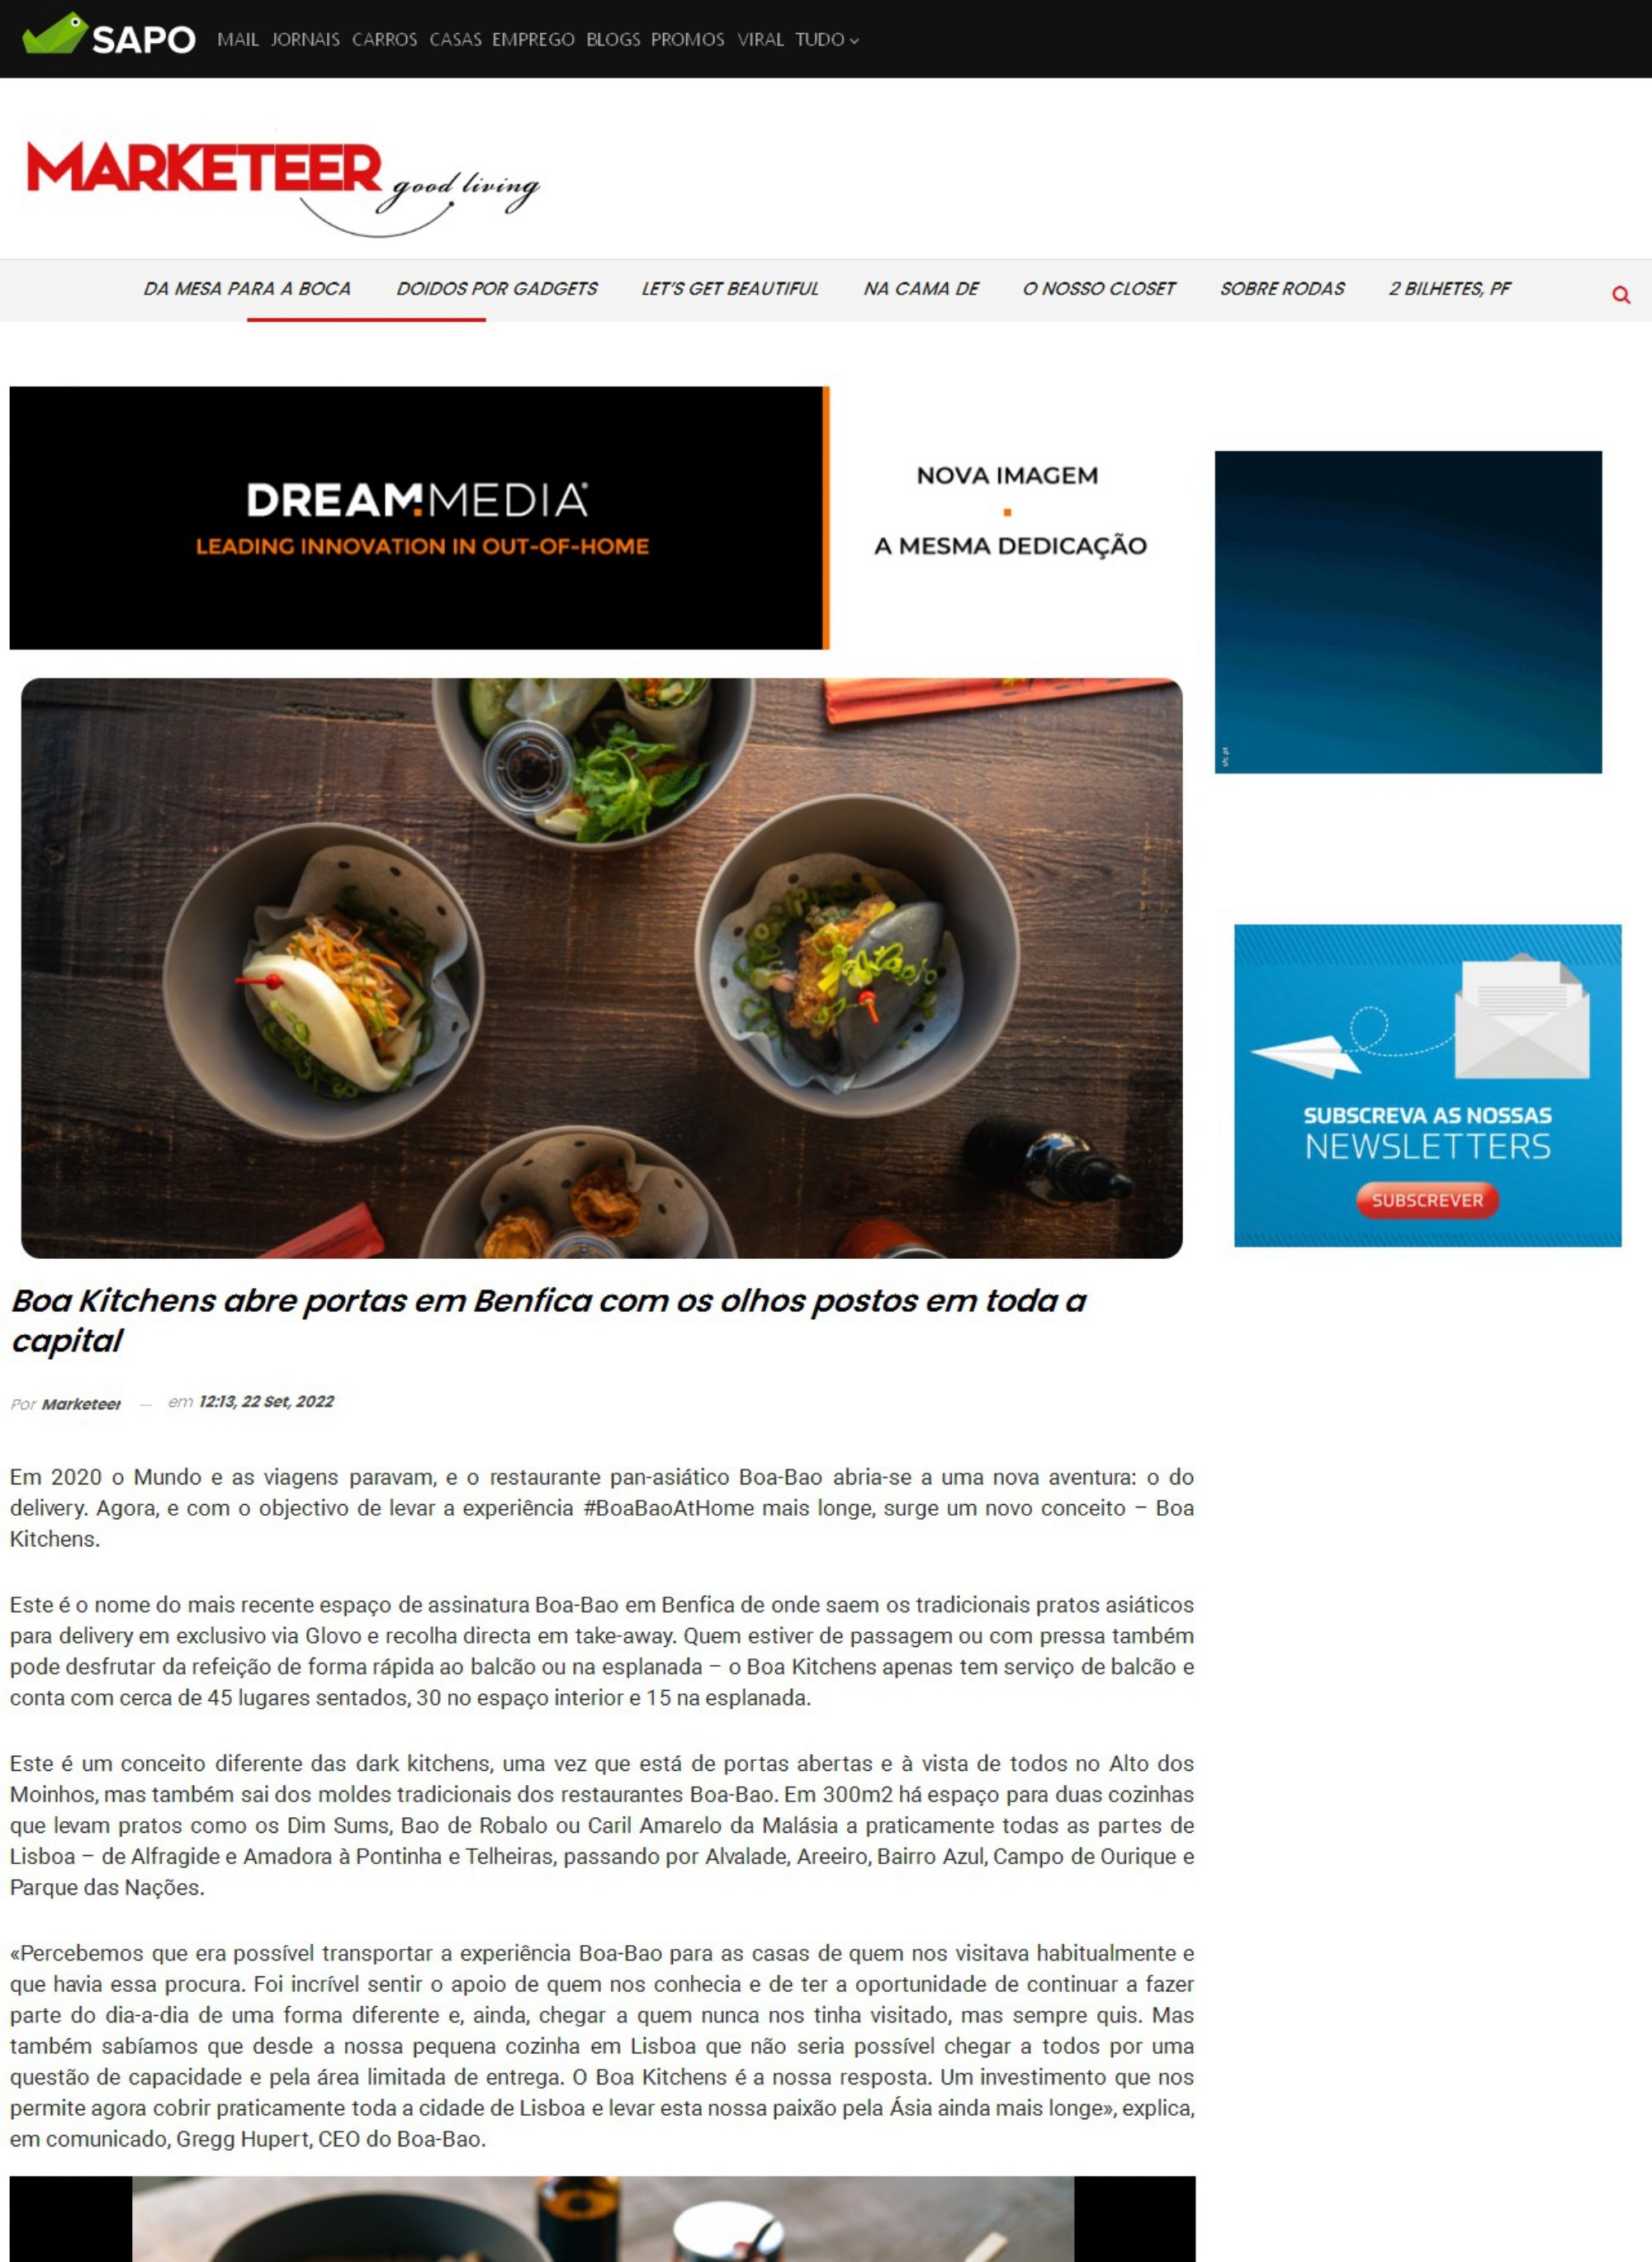 Marketeer Online_Boa Kitchens opens doors in Benfica with eyes set on the entire capital_page-0001.jpg